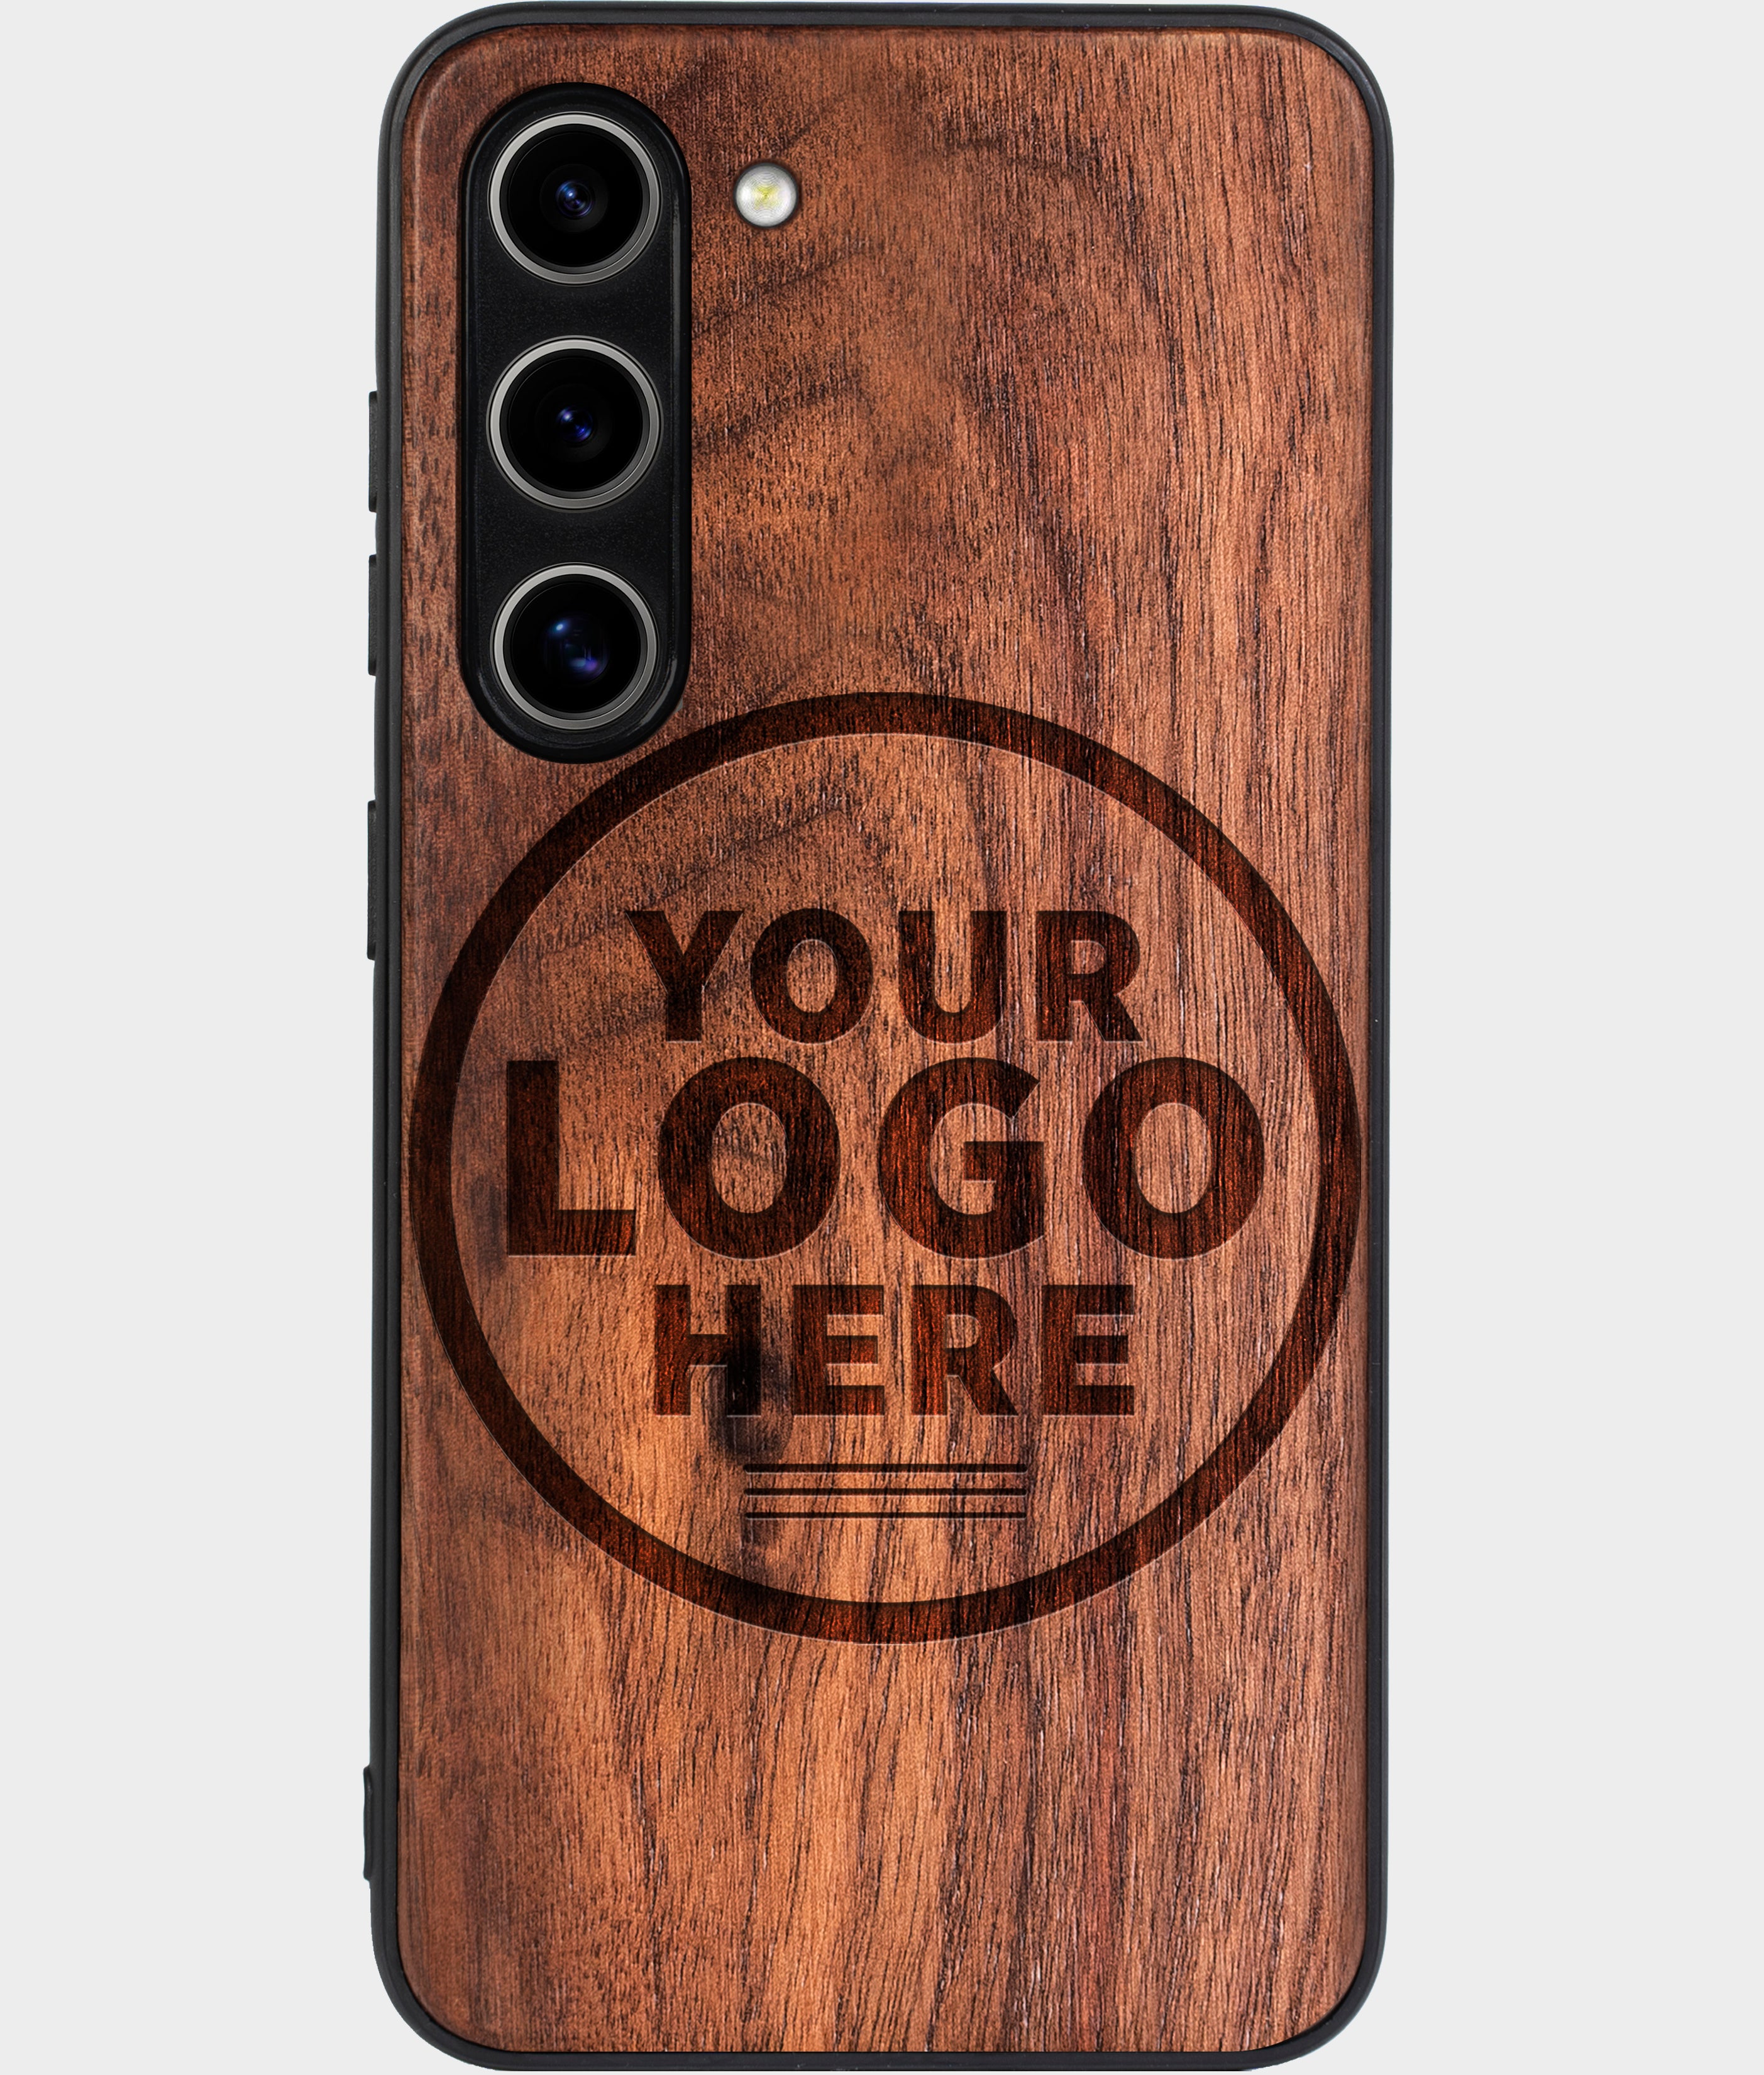 Wood Samsung Galaxy S24 Plus Case Custom Engraved Walnut Wood S24 Plus Cover Eco-Friendly S24 Plus Case Sustainable S24 Plus Case Outdoor S24 Plus Case For Men Military Grade S24 Plus Cover - Engraved In Nature